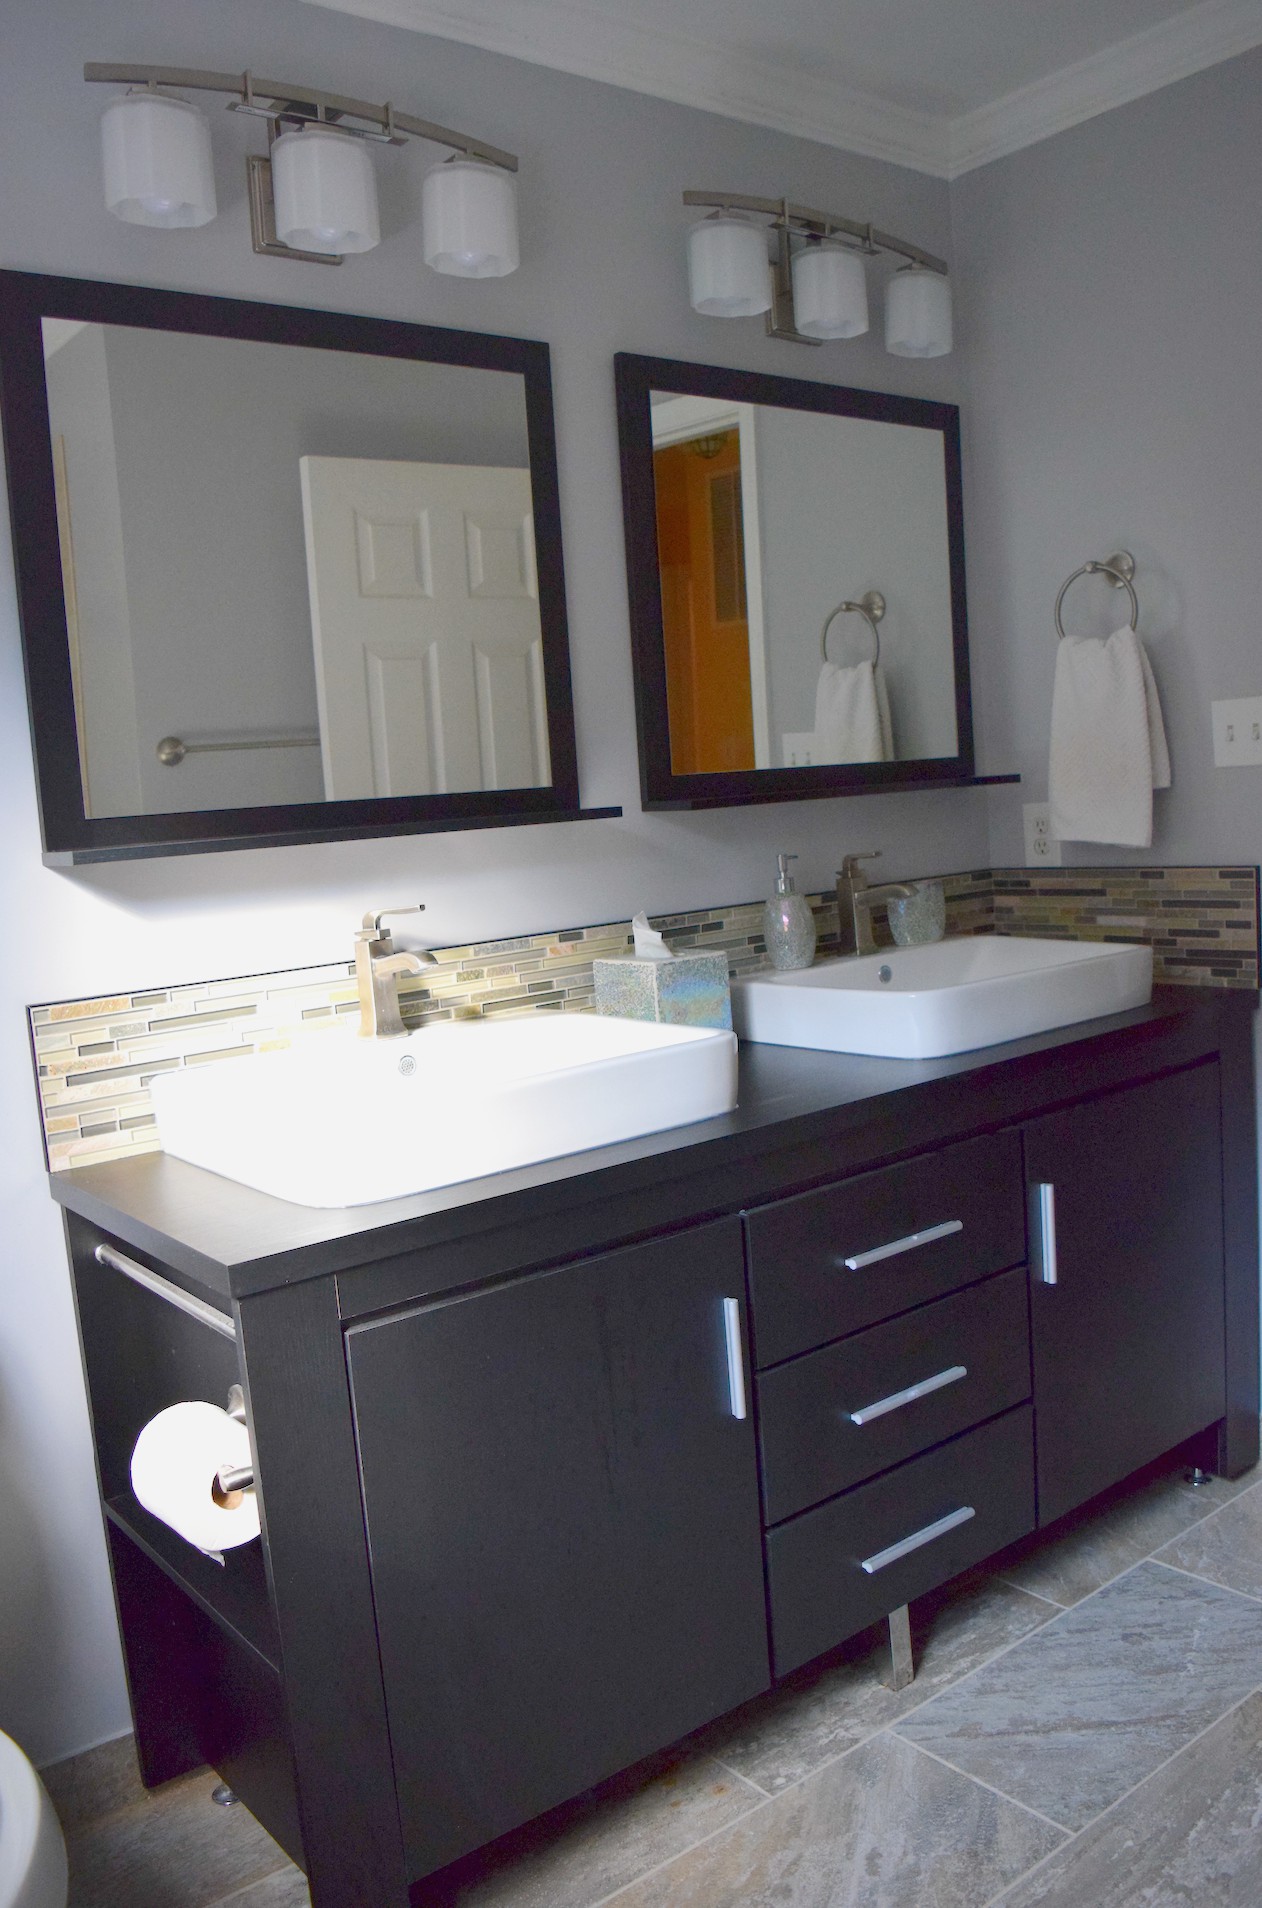 A bathroom remodel is one of the easiest and most common home improvement projects. Here are 5 tips when remodeling a bathroom! Full story @ www.hipmamasplace.com